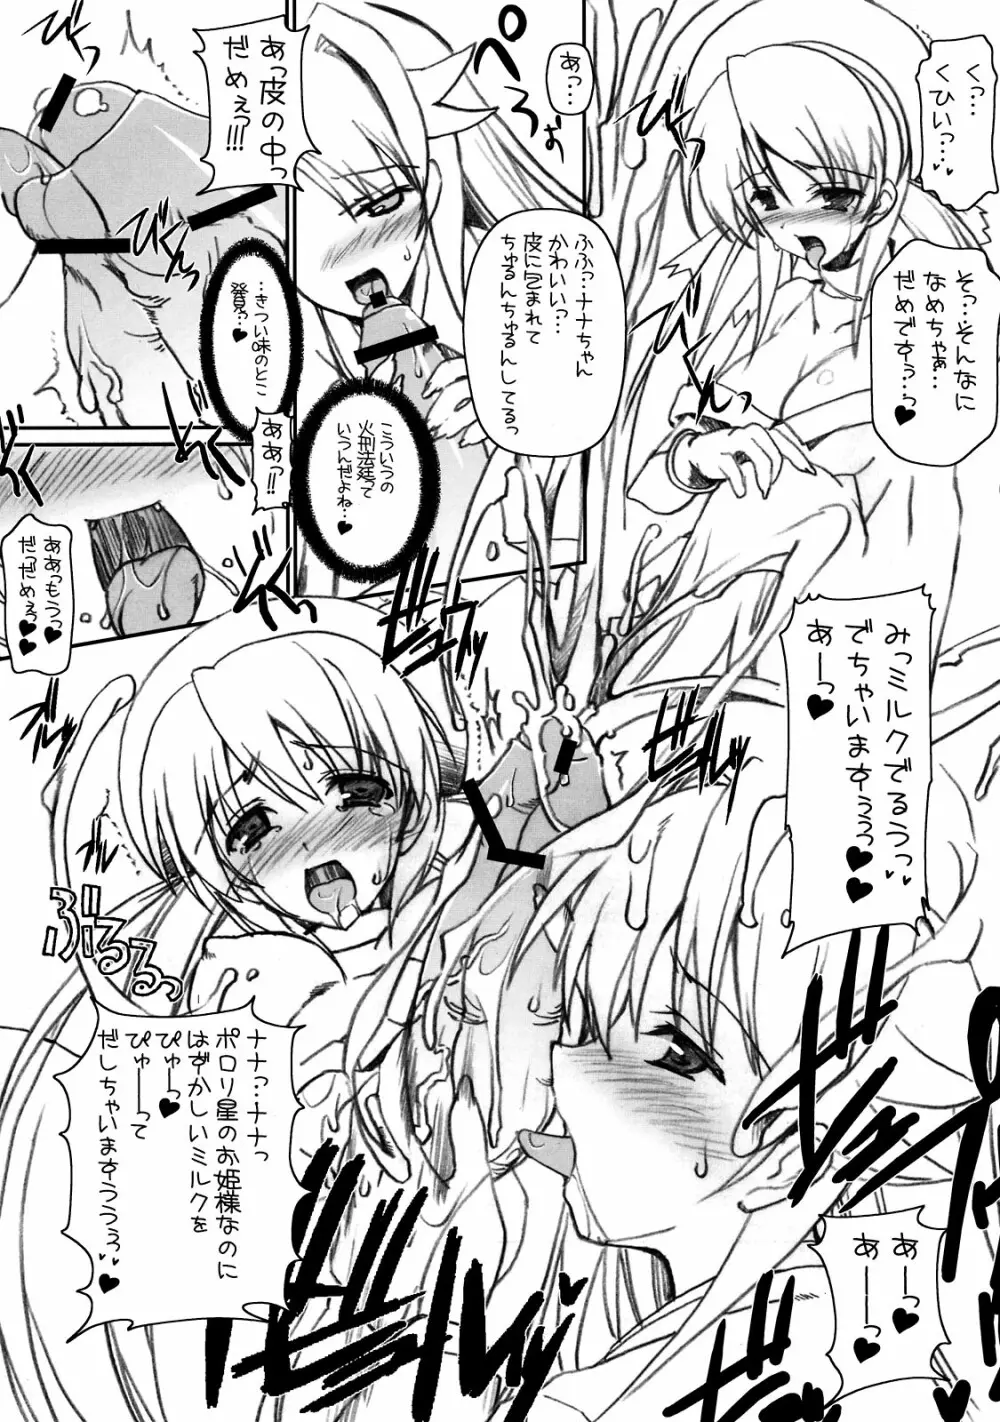 THE SIMPLE ギャル萌え同人誌 Comic Side Page.7